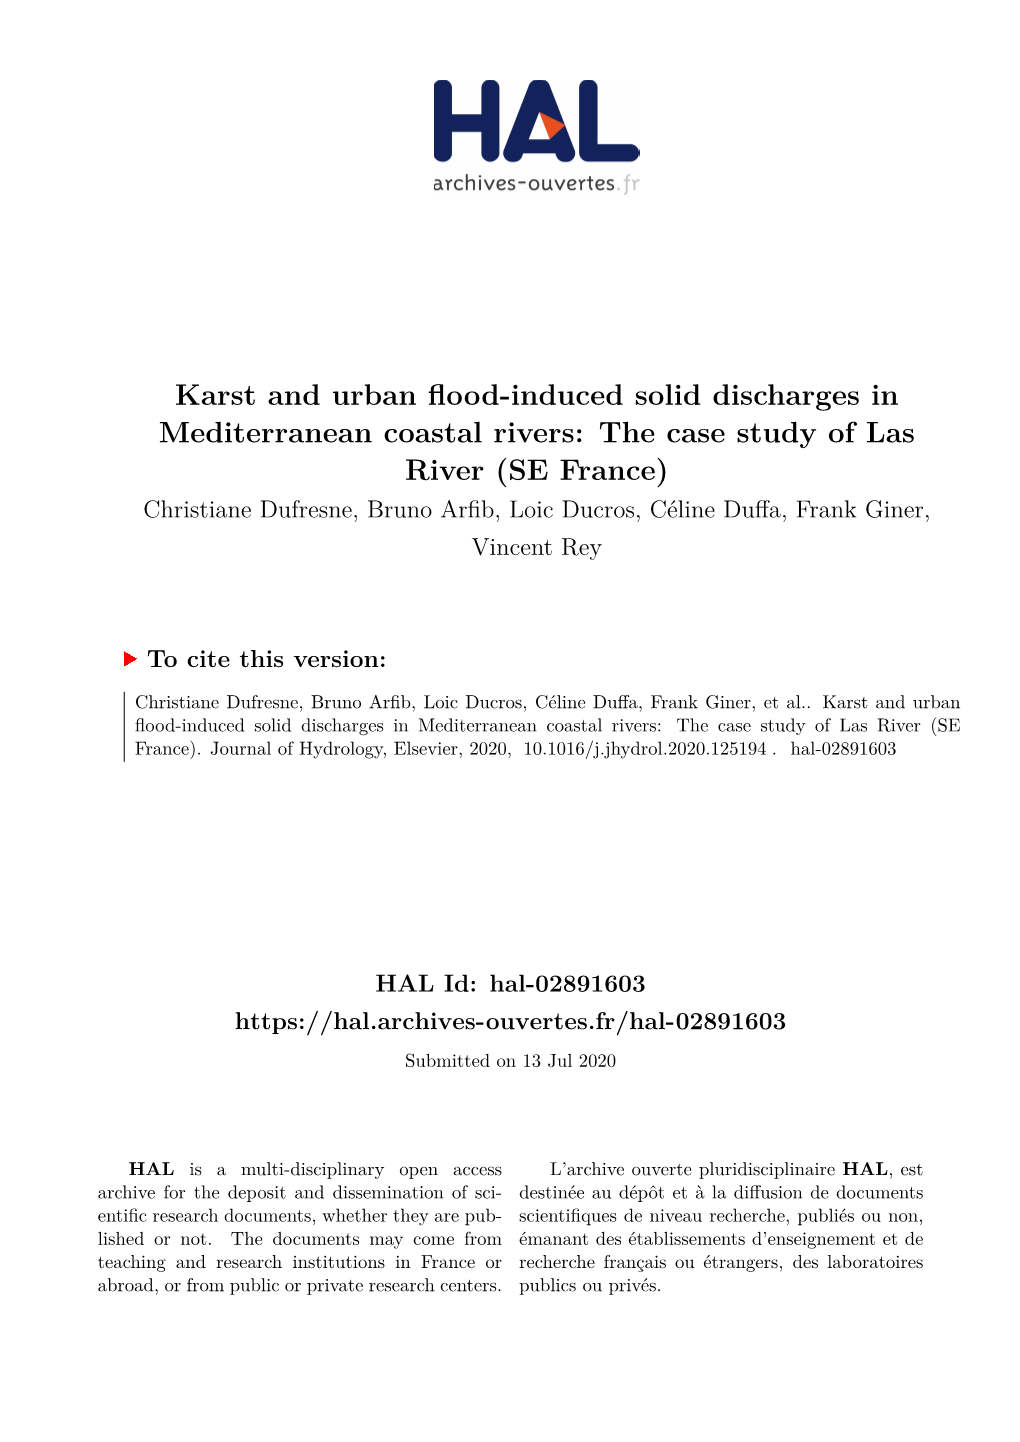 Karst and Urban Flood-Induced Solid Discharges in Mediterranean